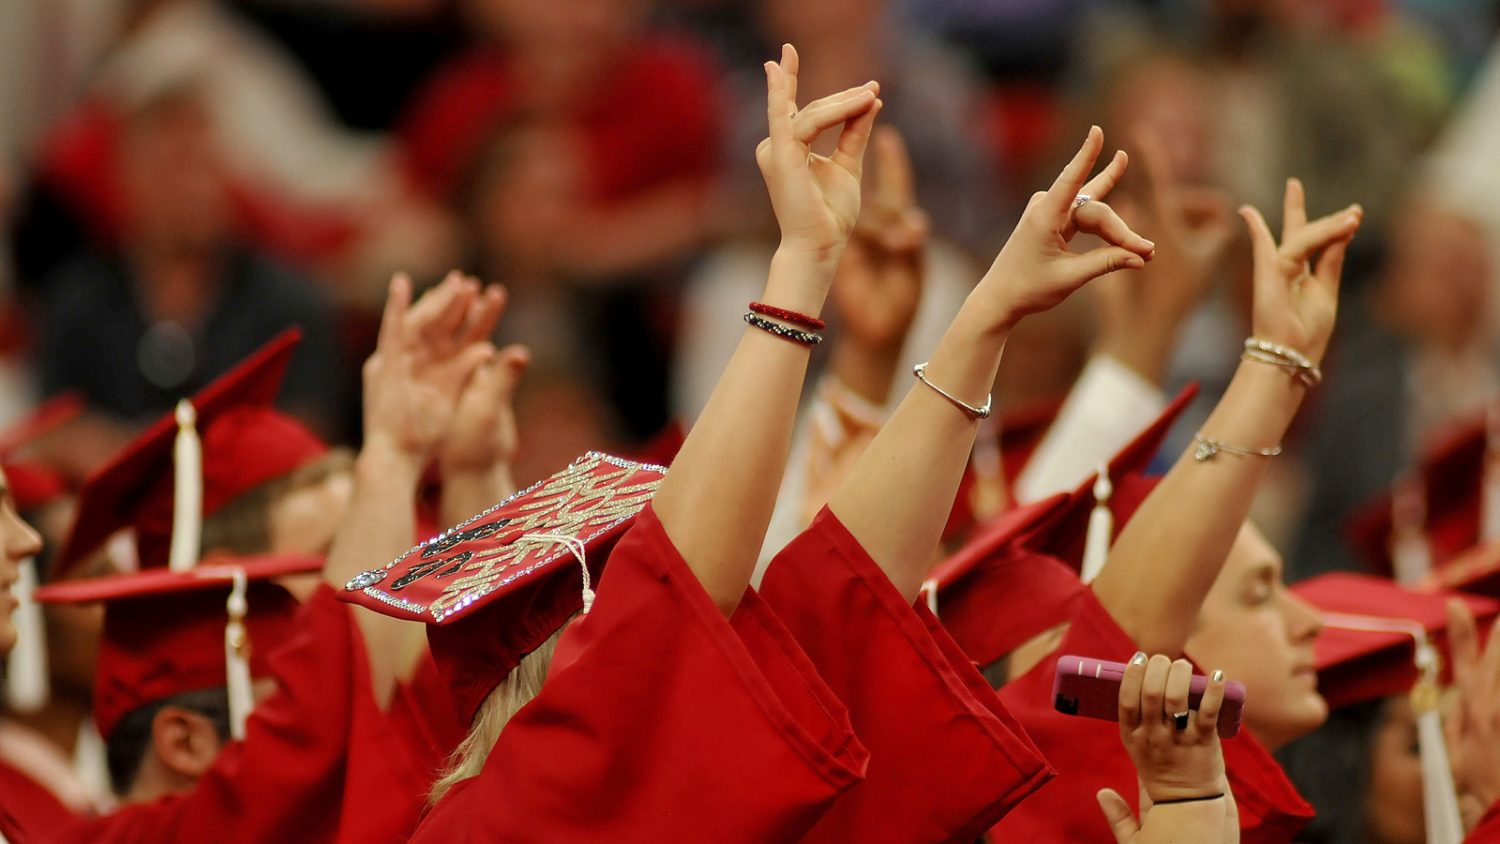 hands of students in graduation robes doing the wolfie